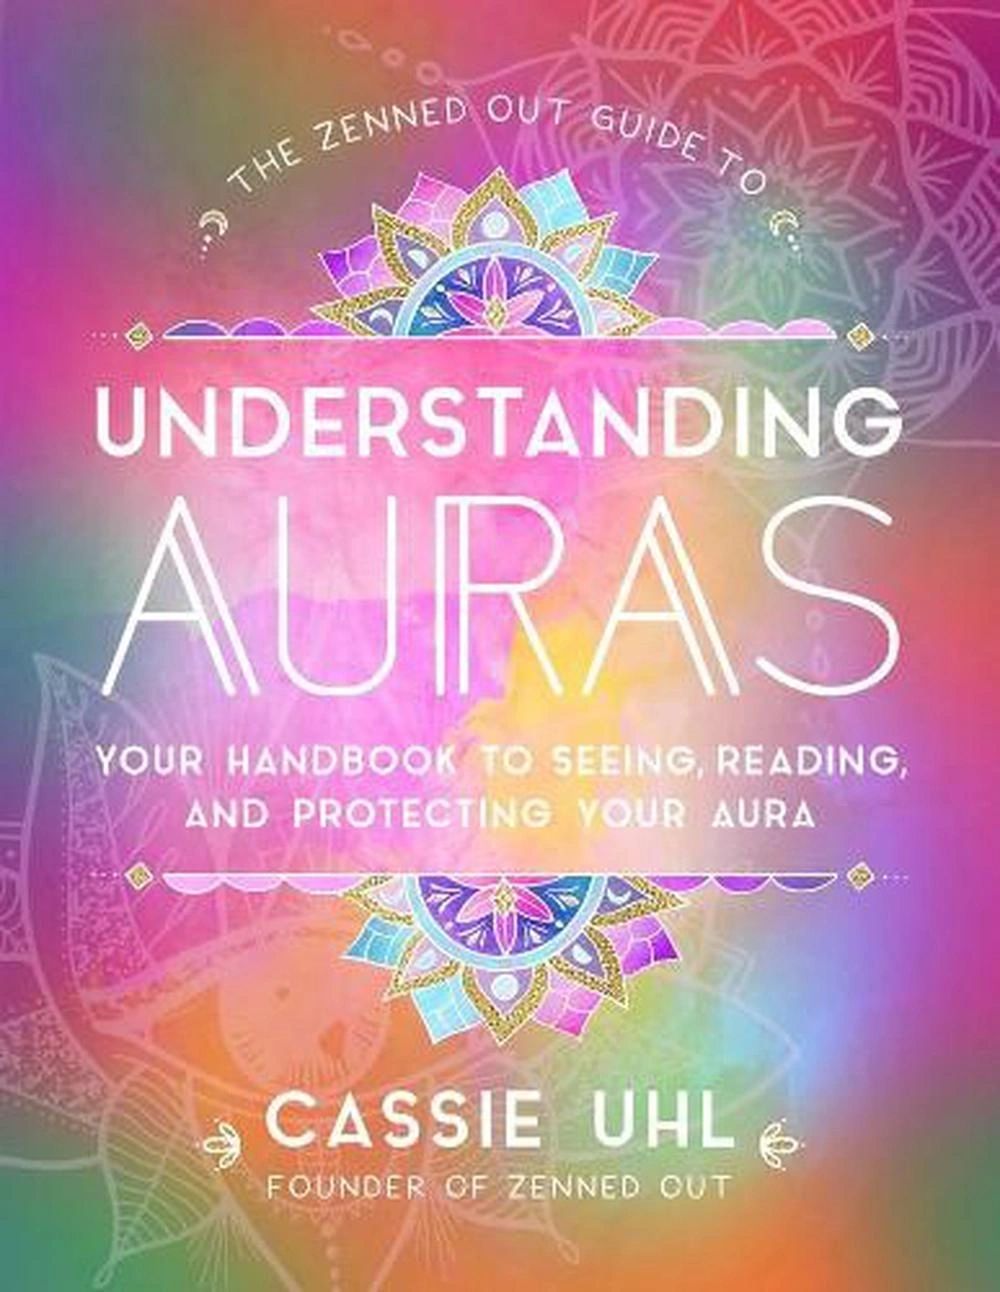 The Zenned Out Guide to Understanding Auras - Cassie Uhl